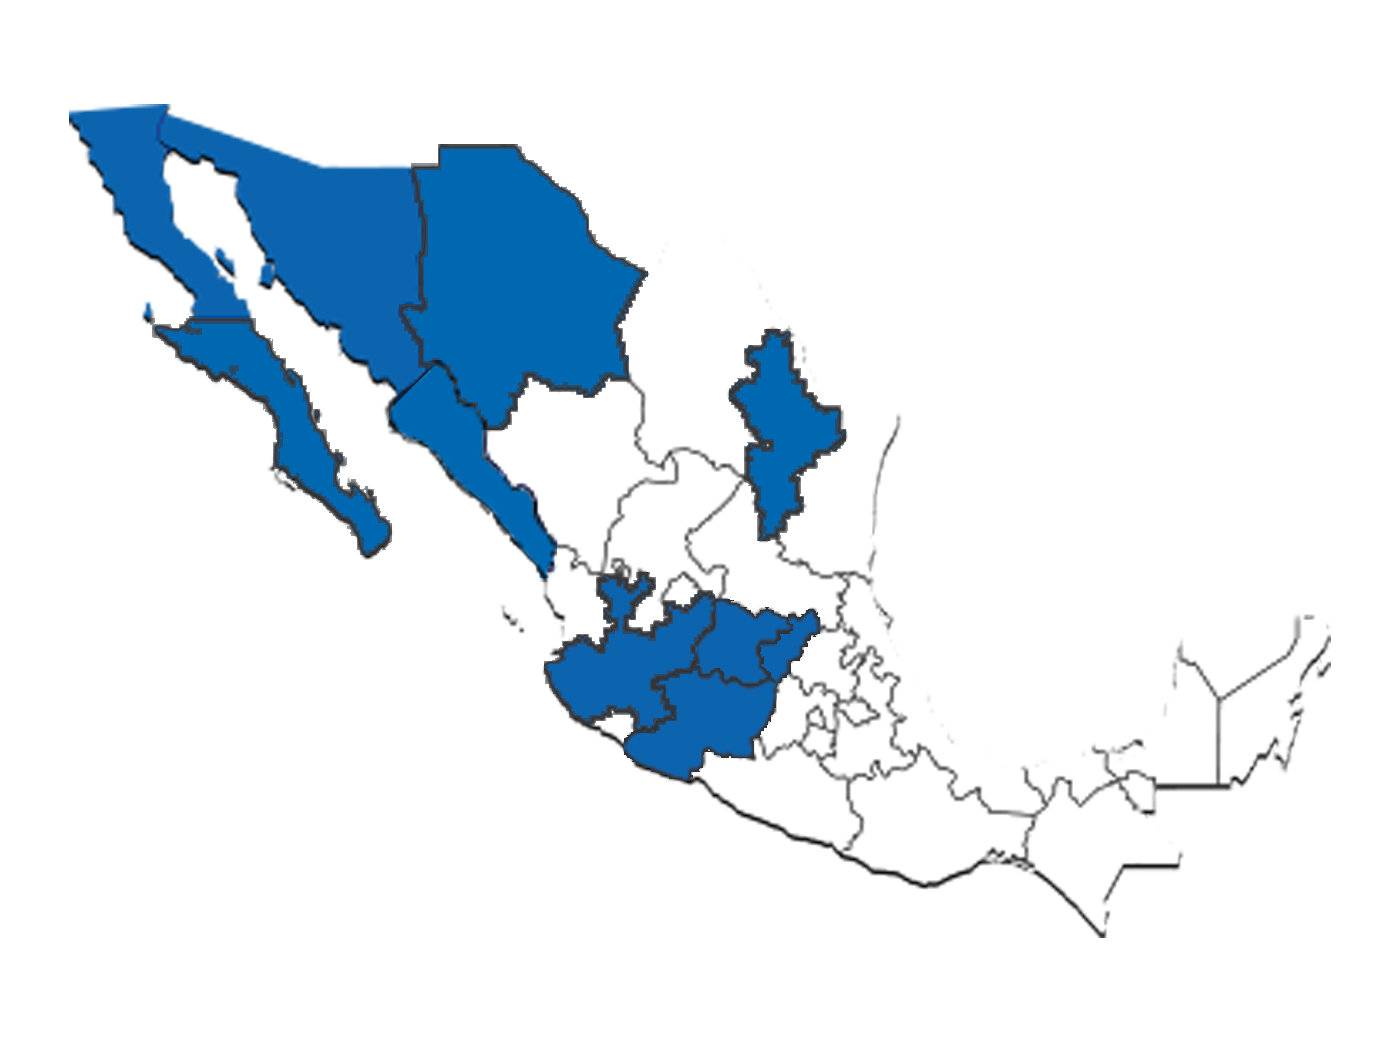 Map of Mexico with ARCO location states colored blue.